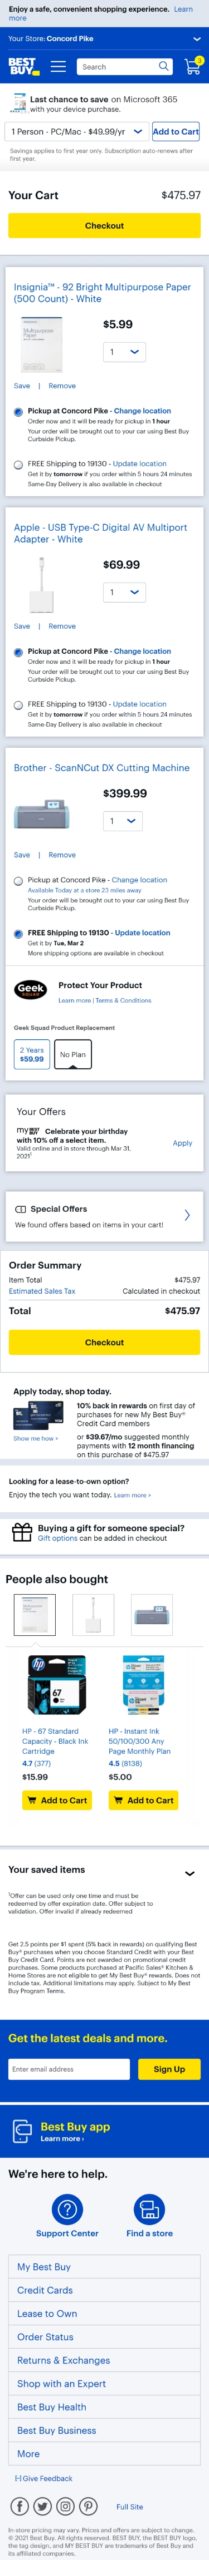 bestbuy cart page mobile scaled